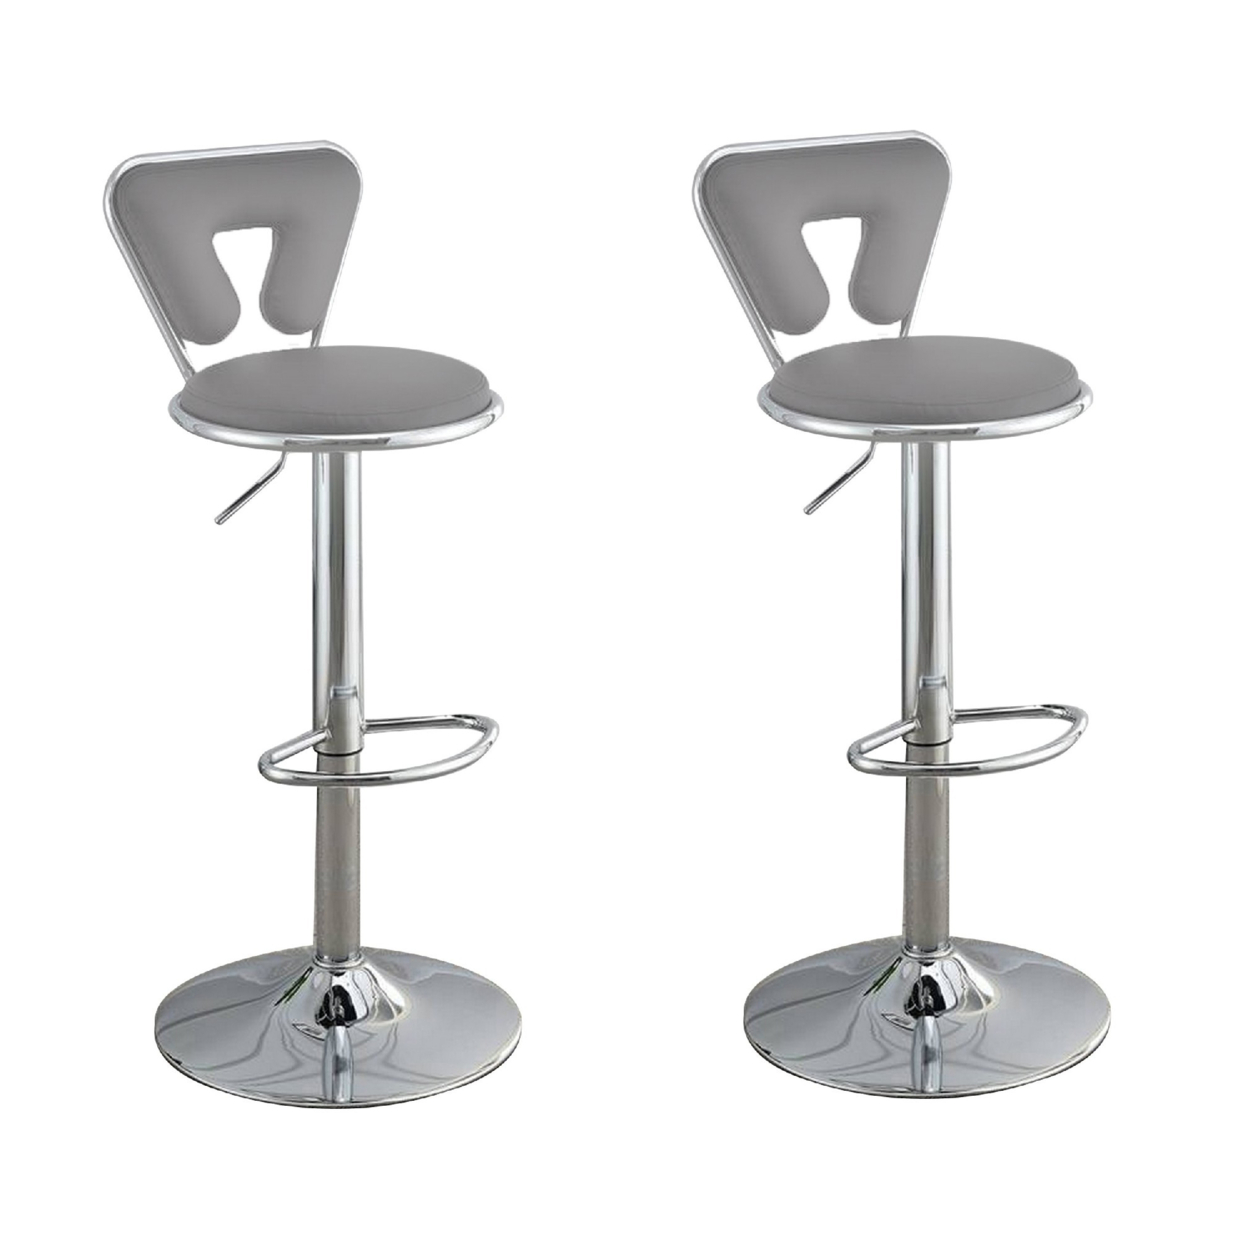 Adjustable Barstool With Round Seat And Stalk Support, Set Of 2, Gray- Saltoro Sherpi